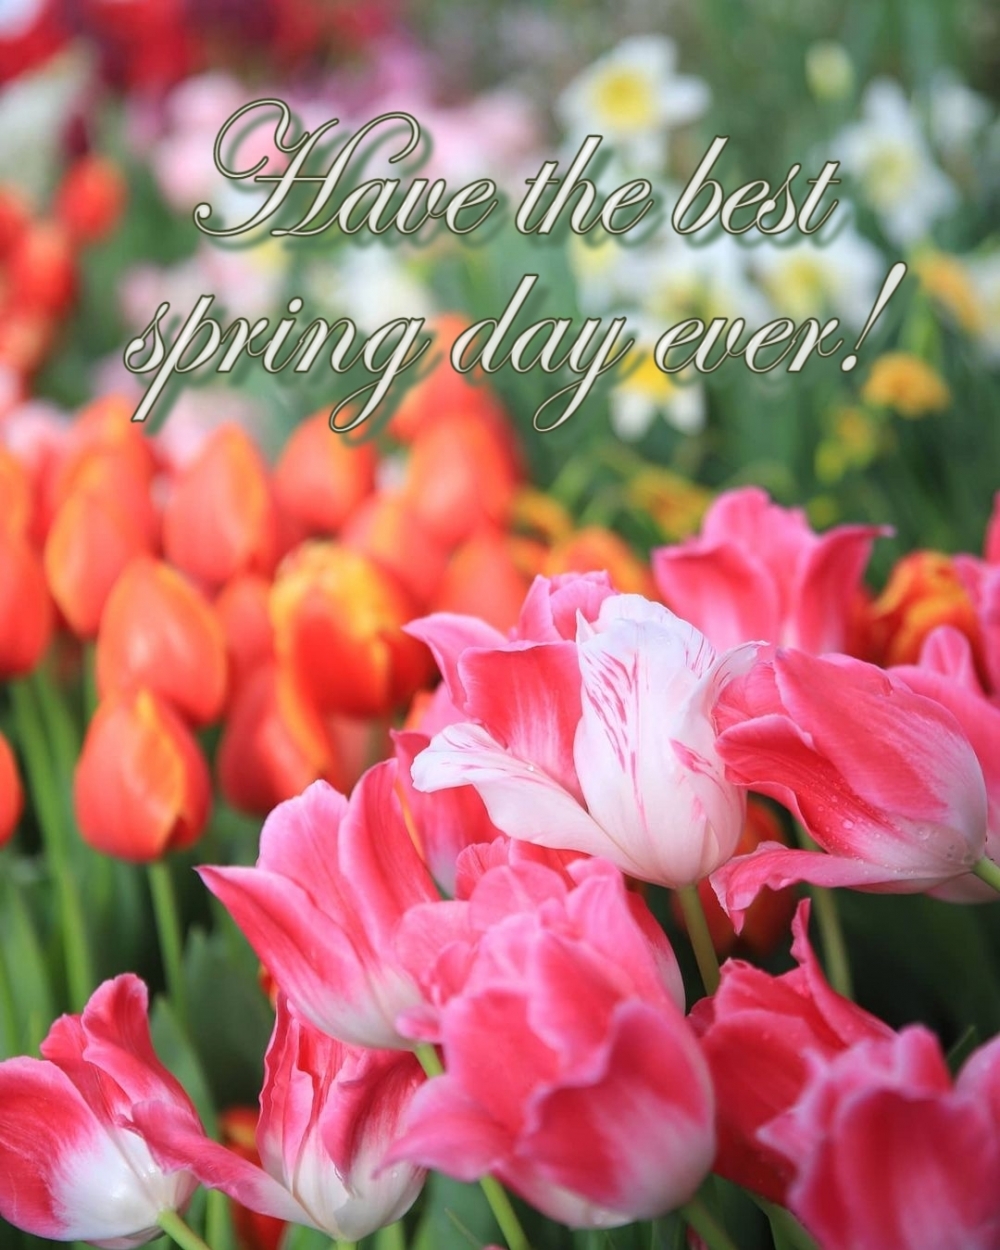 Have the best spring day ever!